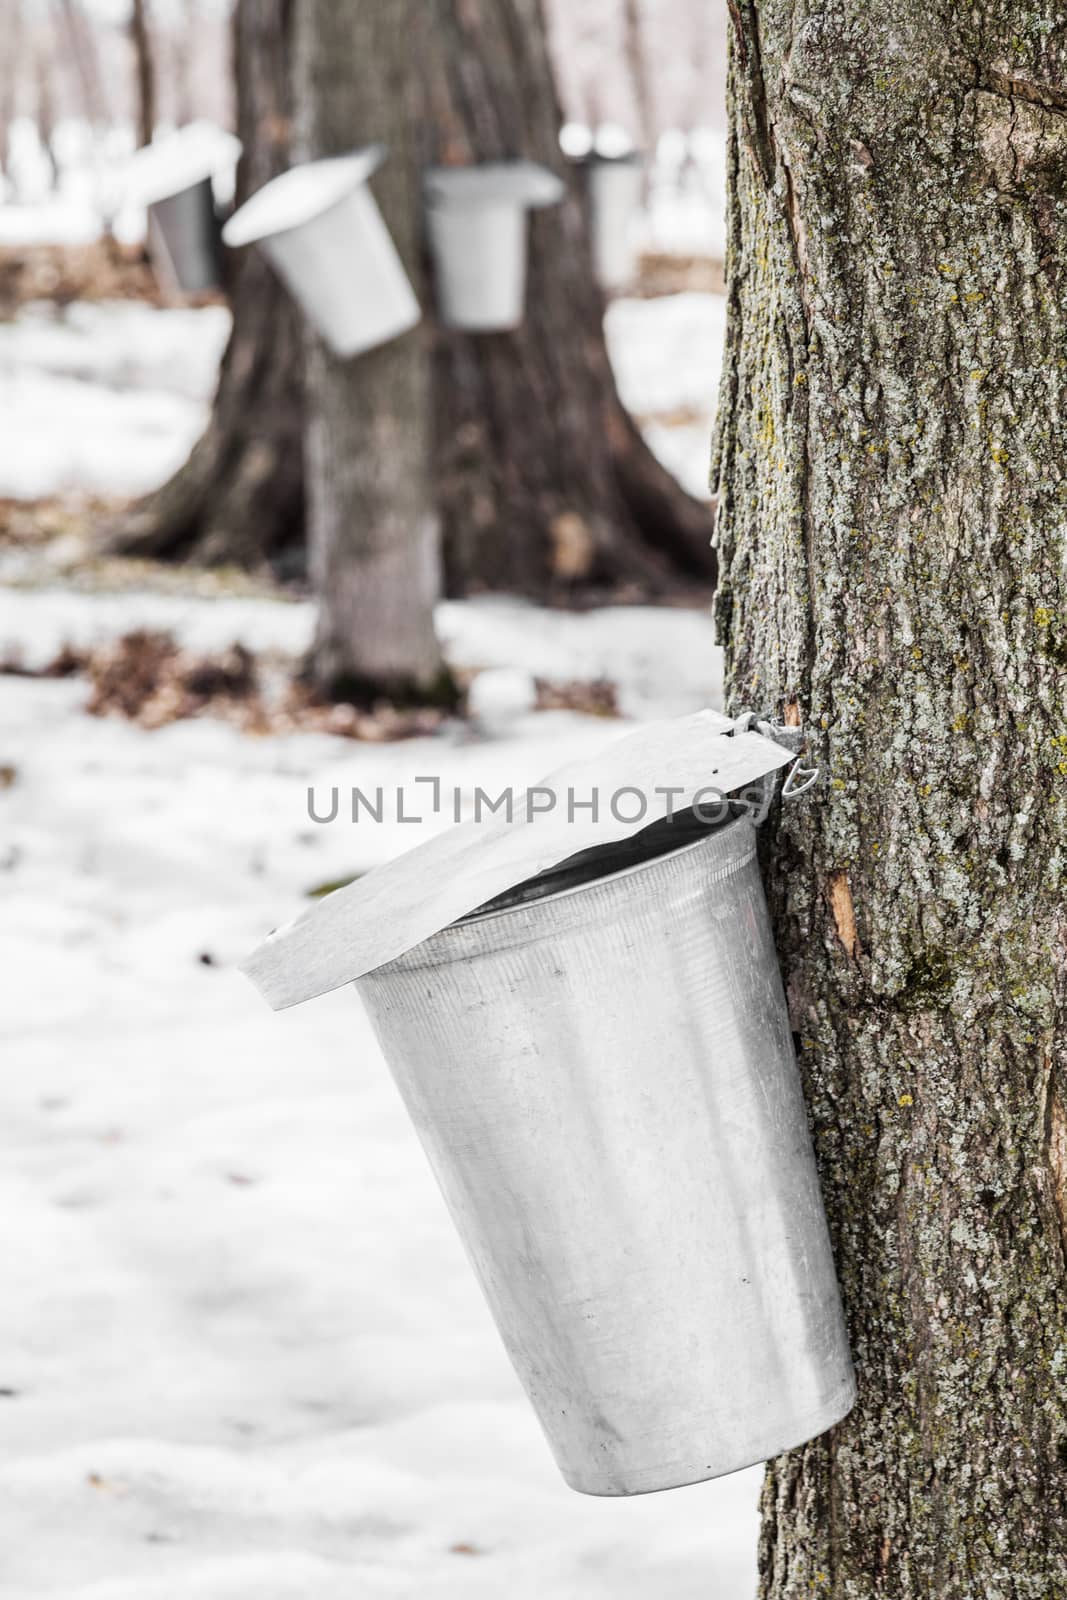 Forest of Maple Sap buckets on trees in spring